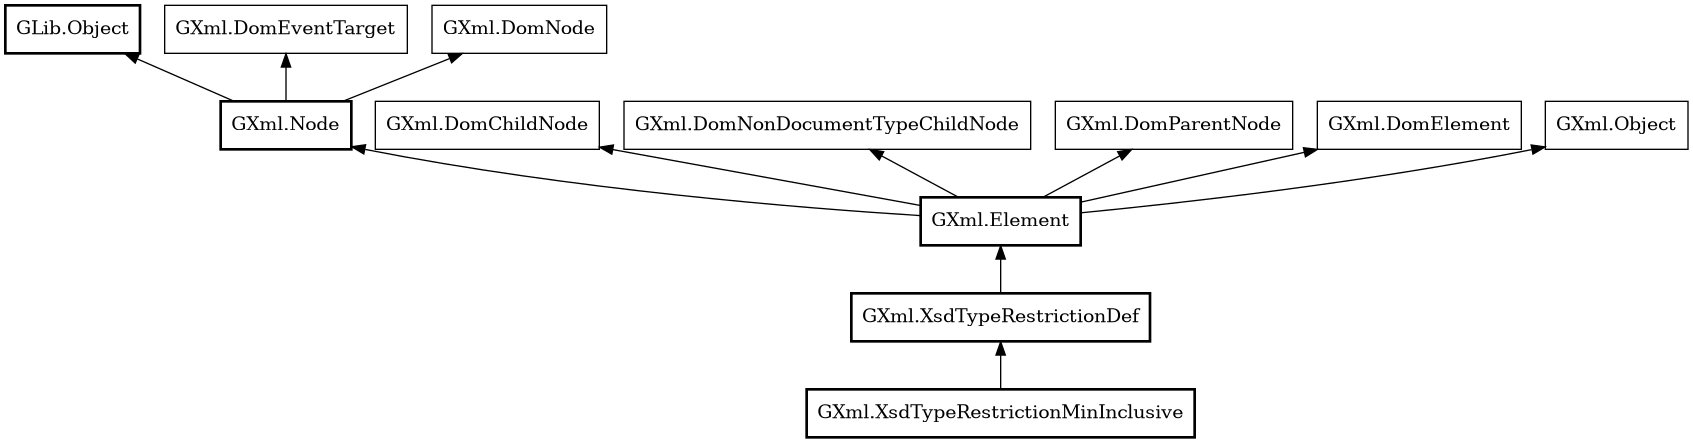 Object hierarchy for XsdTypeRestrictionMinInclusive